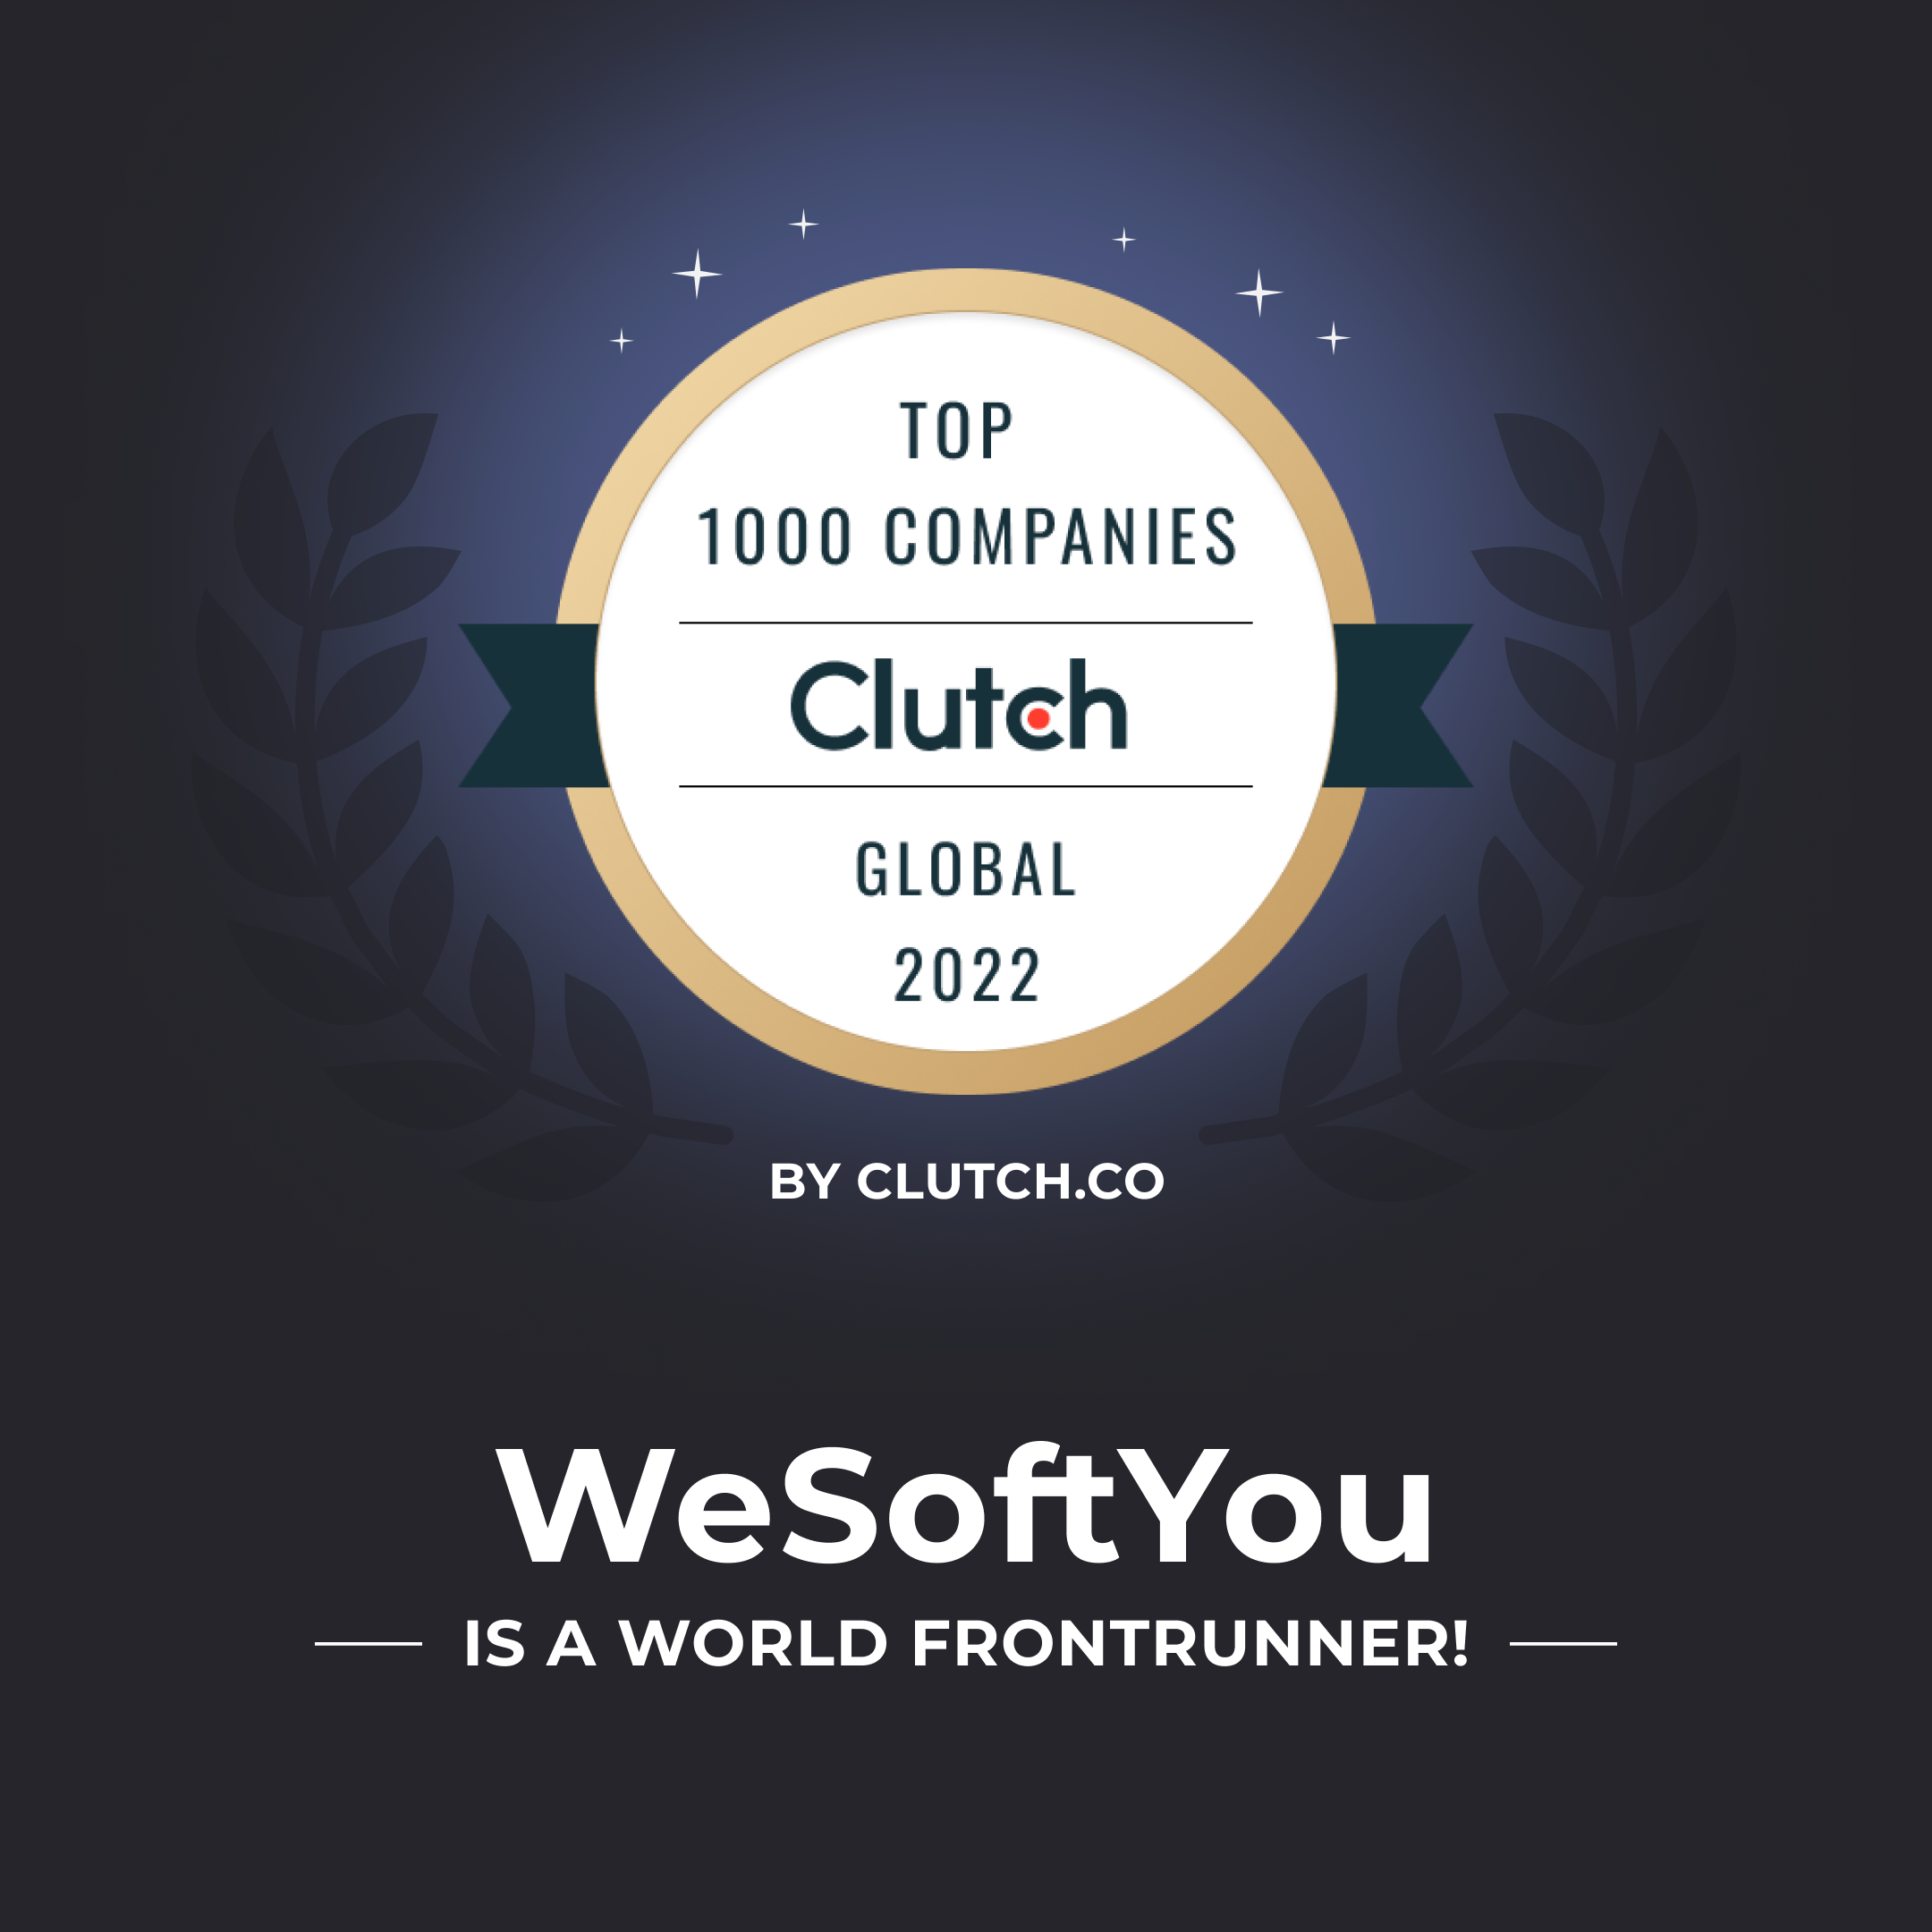 WSU is a world Frontrunner – Top 1% in the world by Clutch, image #3